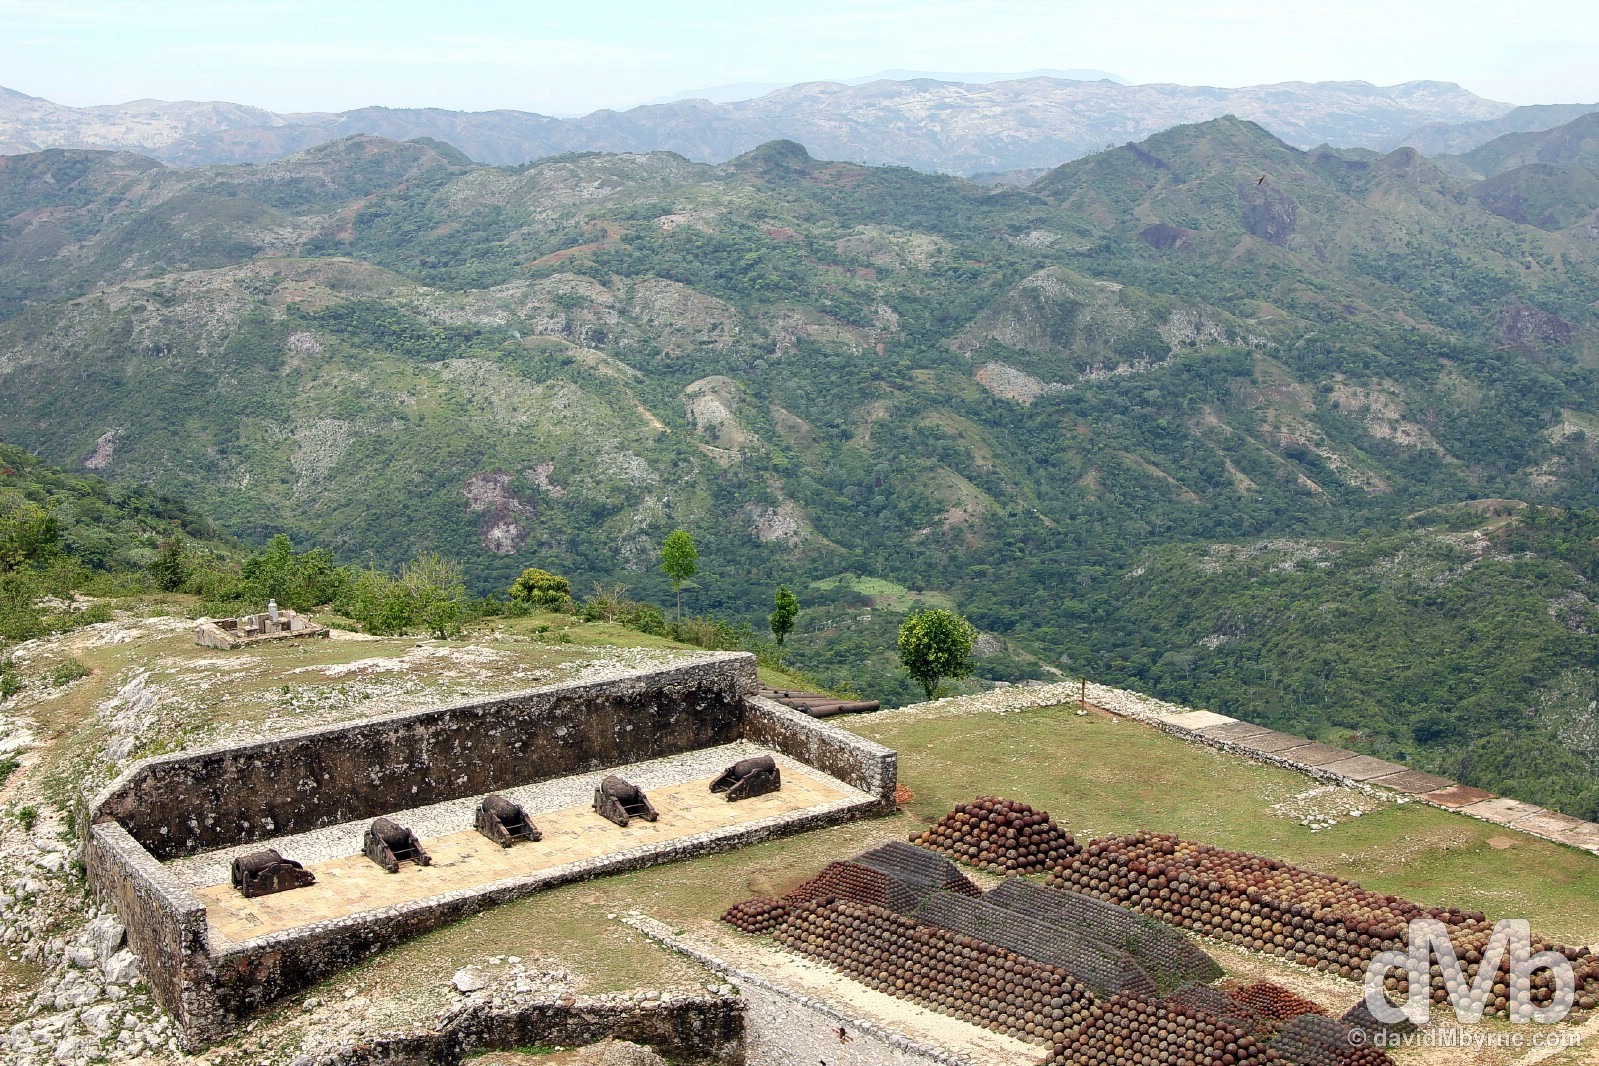 The Haitian countryside as seen from the UNESCO-listed Citadelle Laferrière in northern Haiti, Hispaniola, Greater Antilles. May 22, 2015.